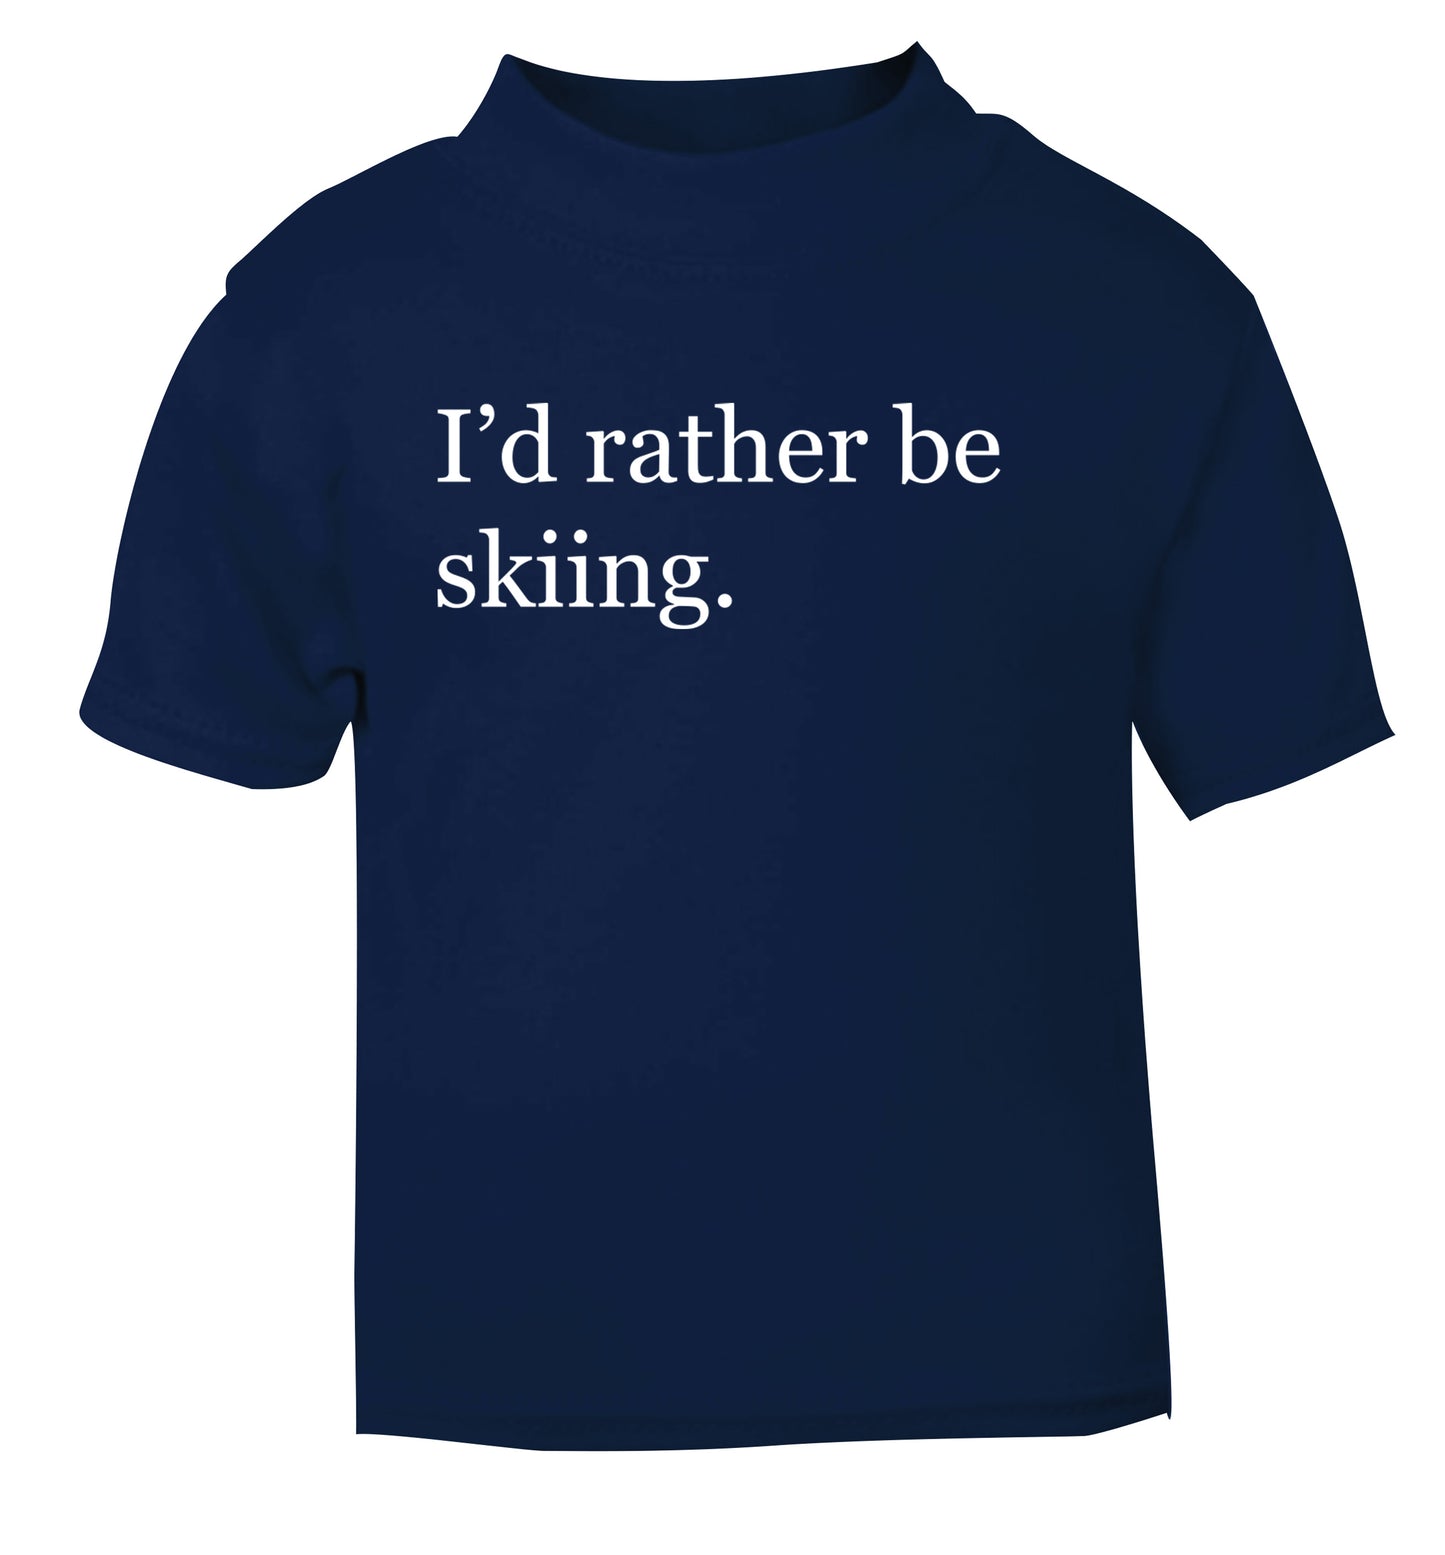 I'd rather be skiing navy Baby Toddler Tshirt 2 Years